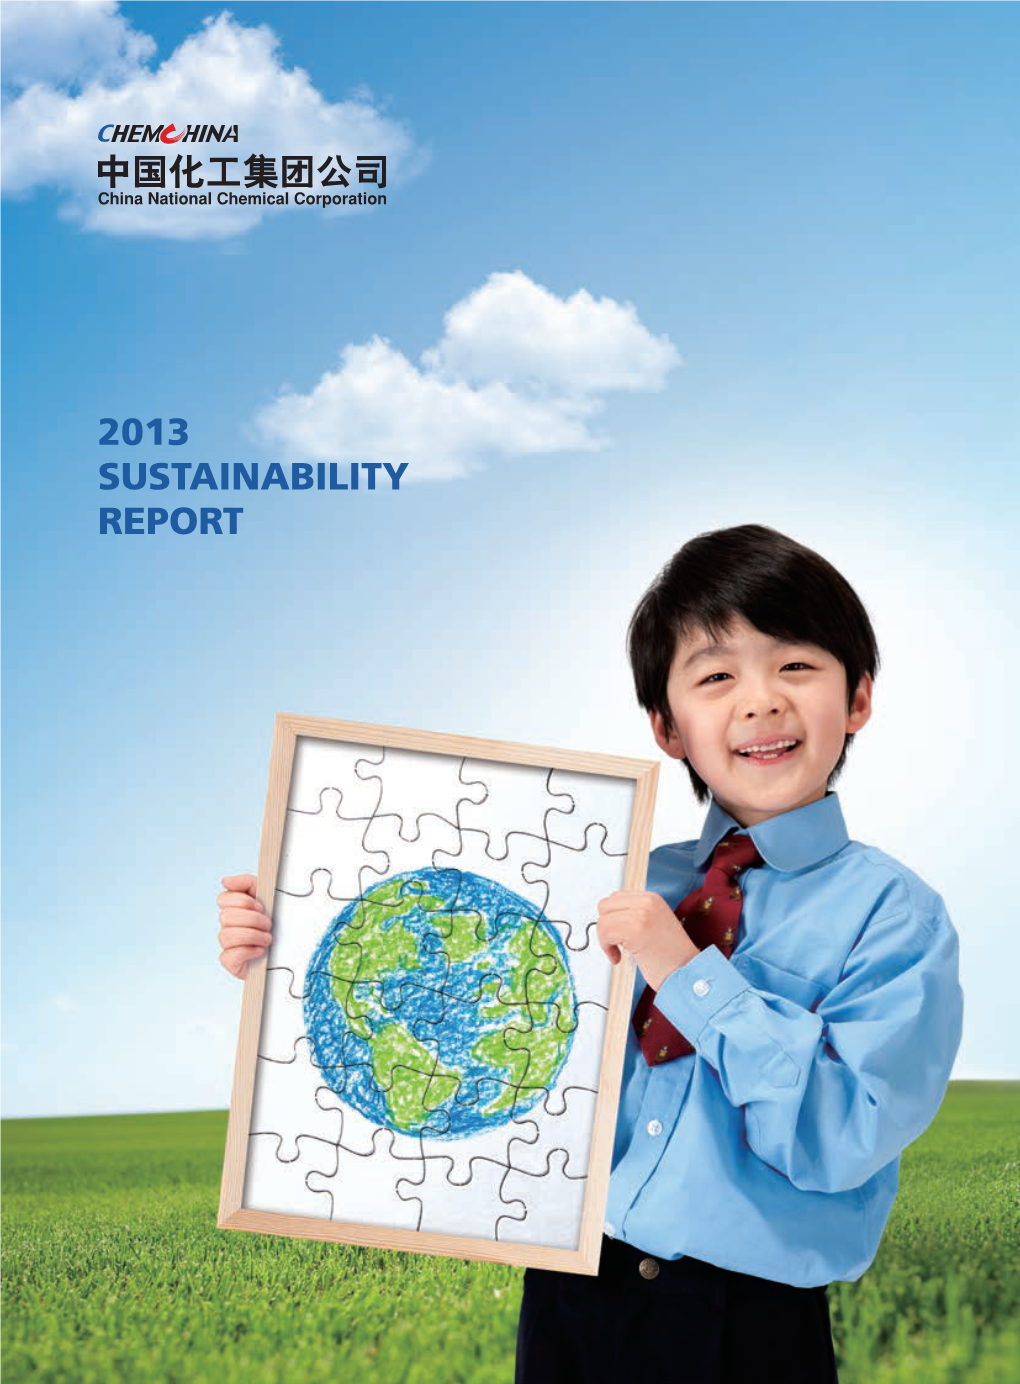 2013 Sustainability Report ABOUT THIS REPORT This Is the Fourth Sustainability Report Published by China National Chemical Corporation (“Chemchina”)